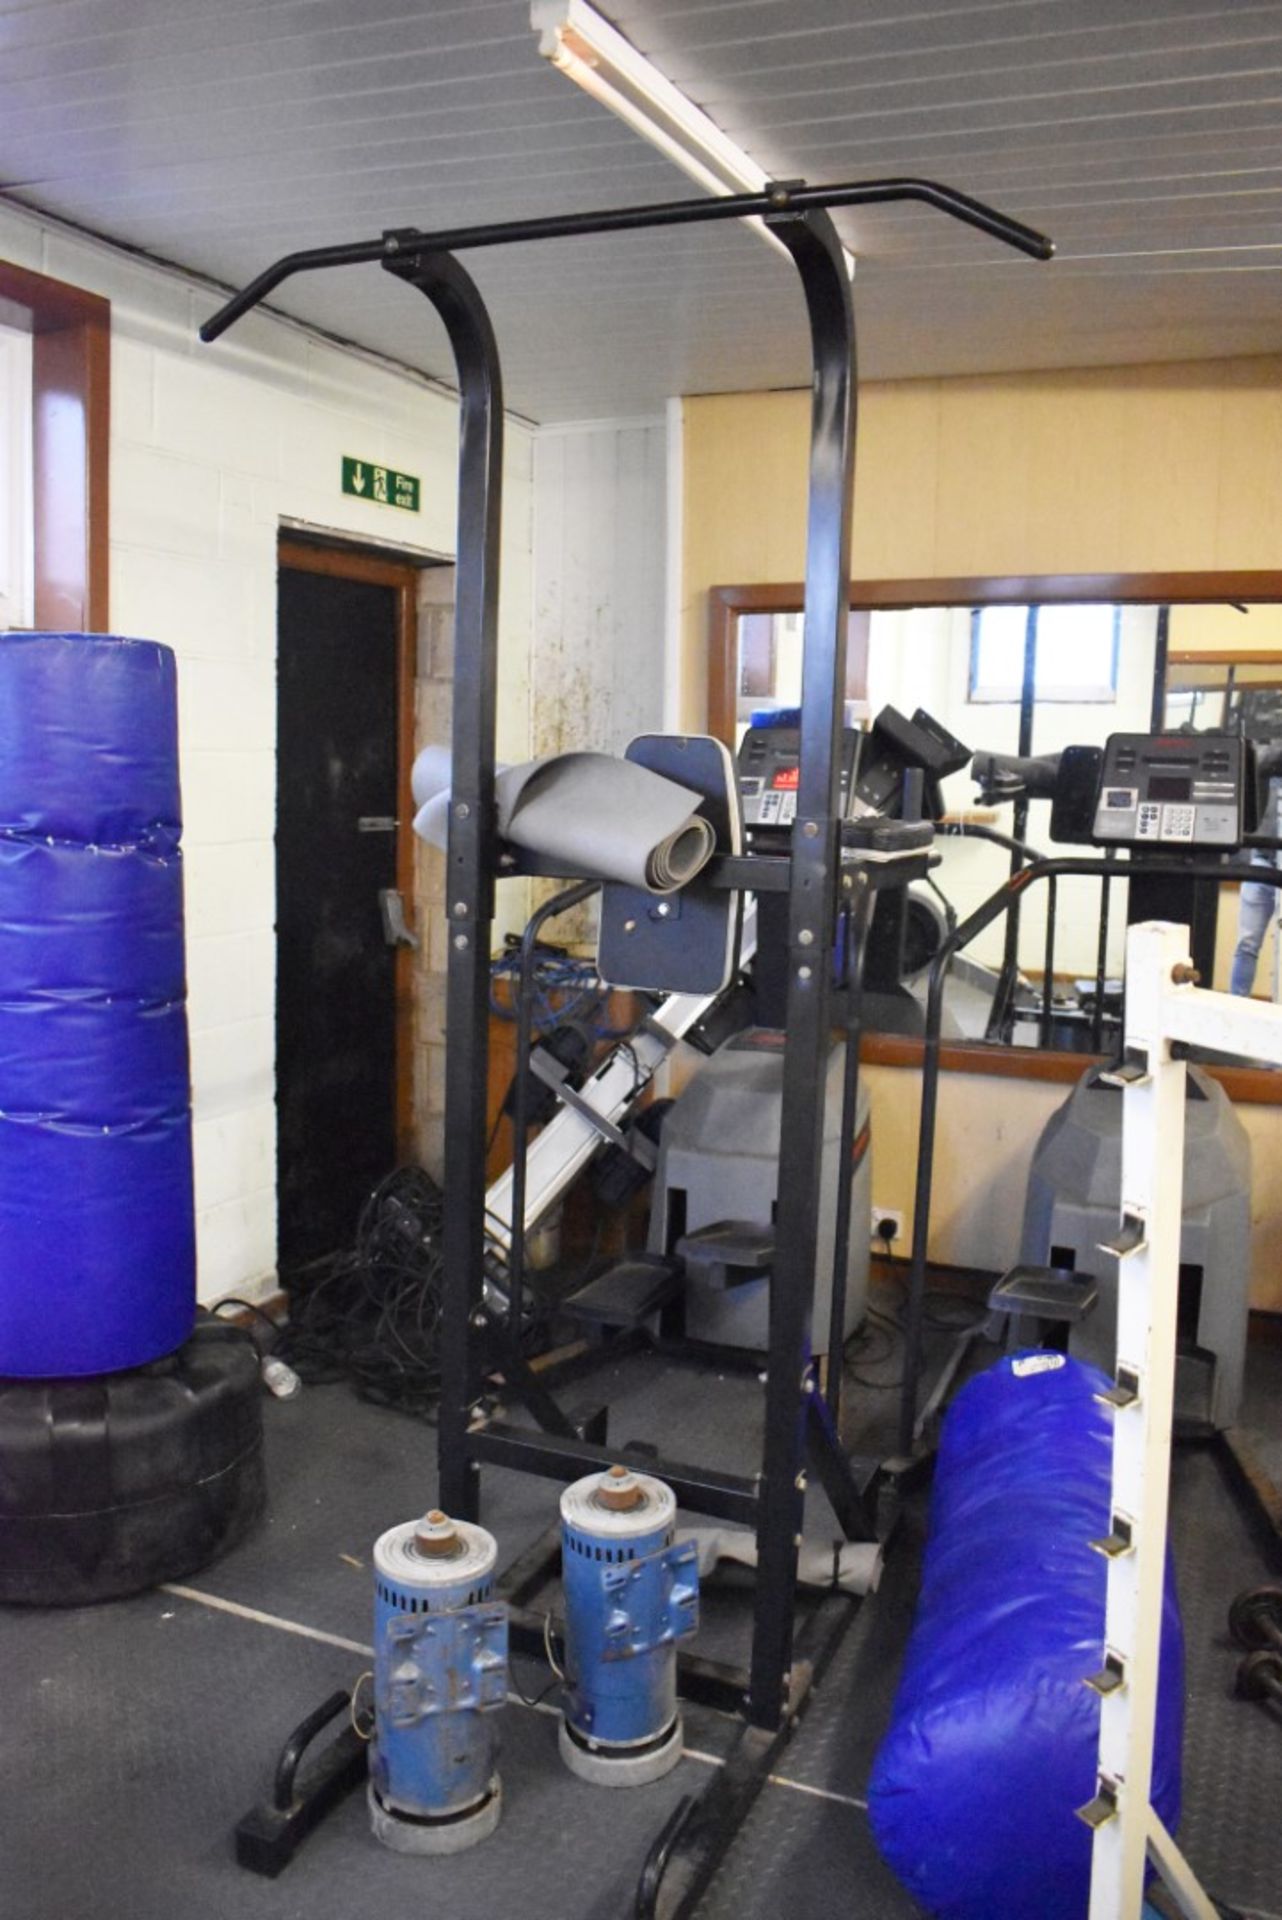 Contents of Bodybuilding and Strongman Gym - Includes Approx 30 Pieces of Gym Equipment, Floor Mats, - Image 66 of 95